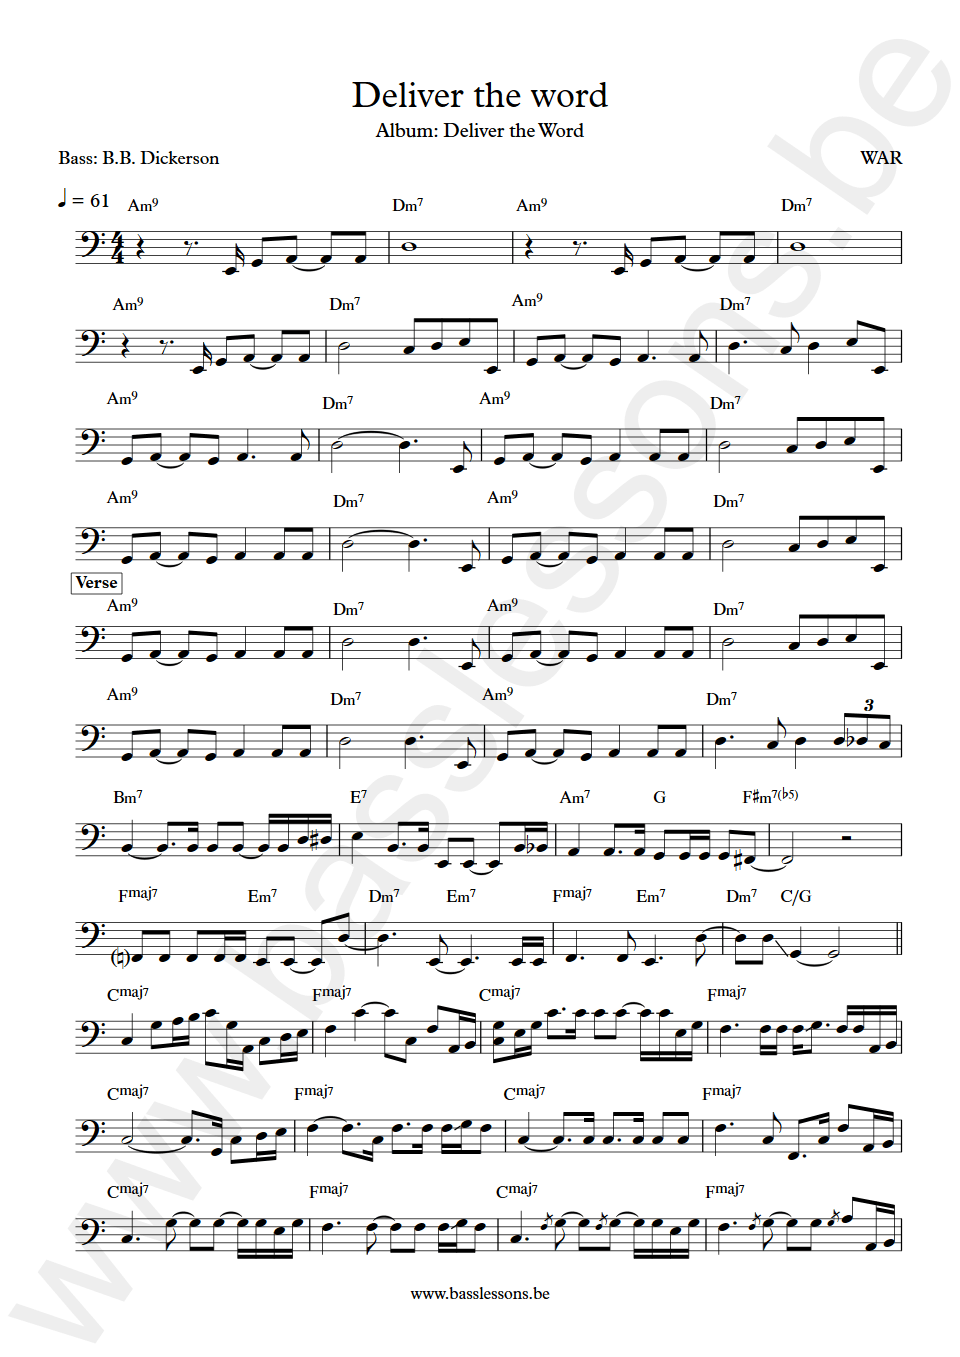 WAR Deliver the word B.B. Dickerson bass transcription